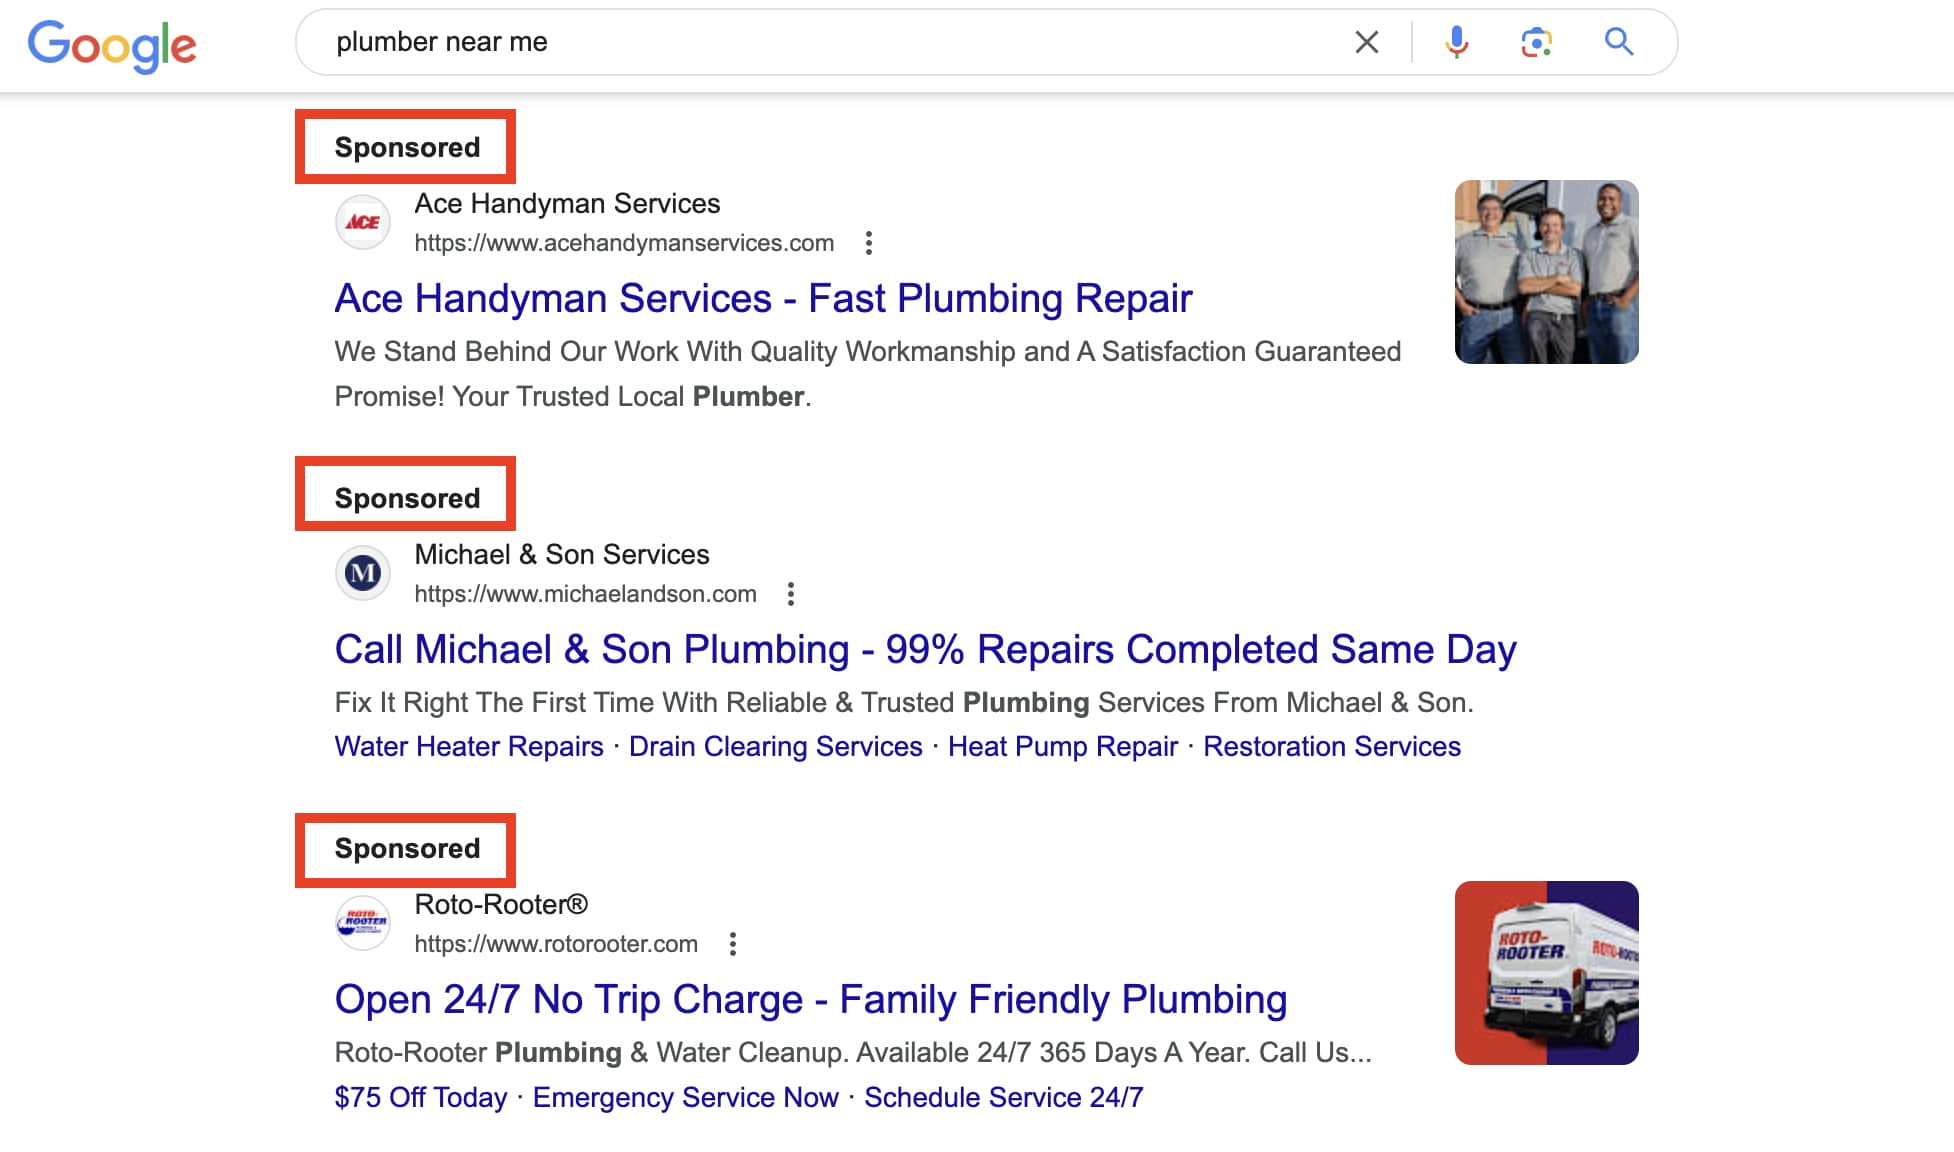 An image highlighting the "sponsored" text on paid ads in Google.